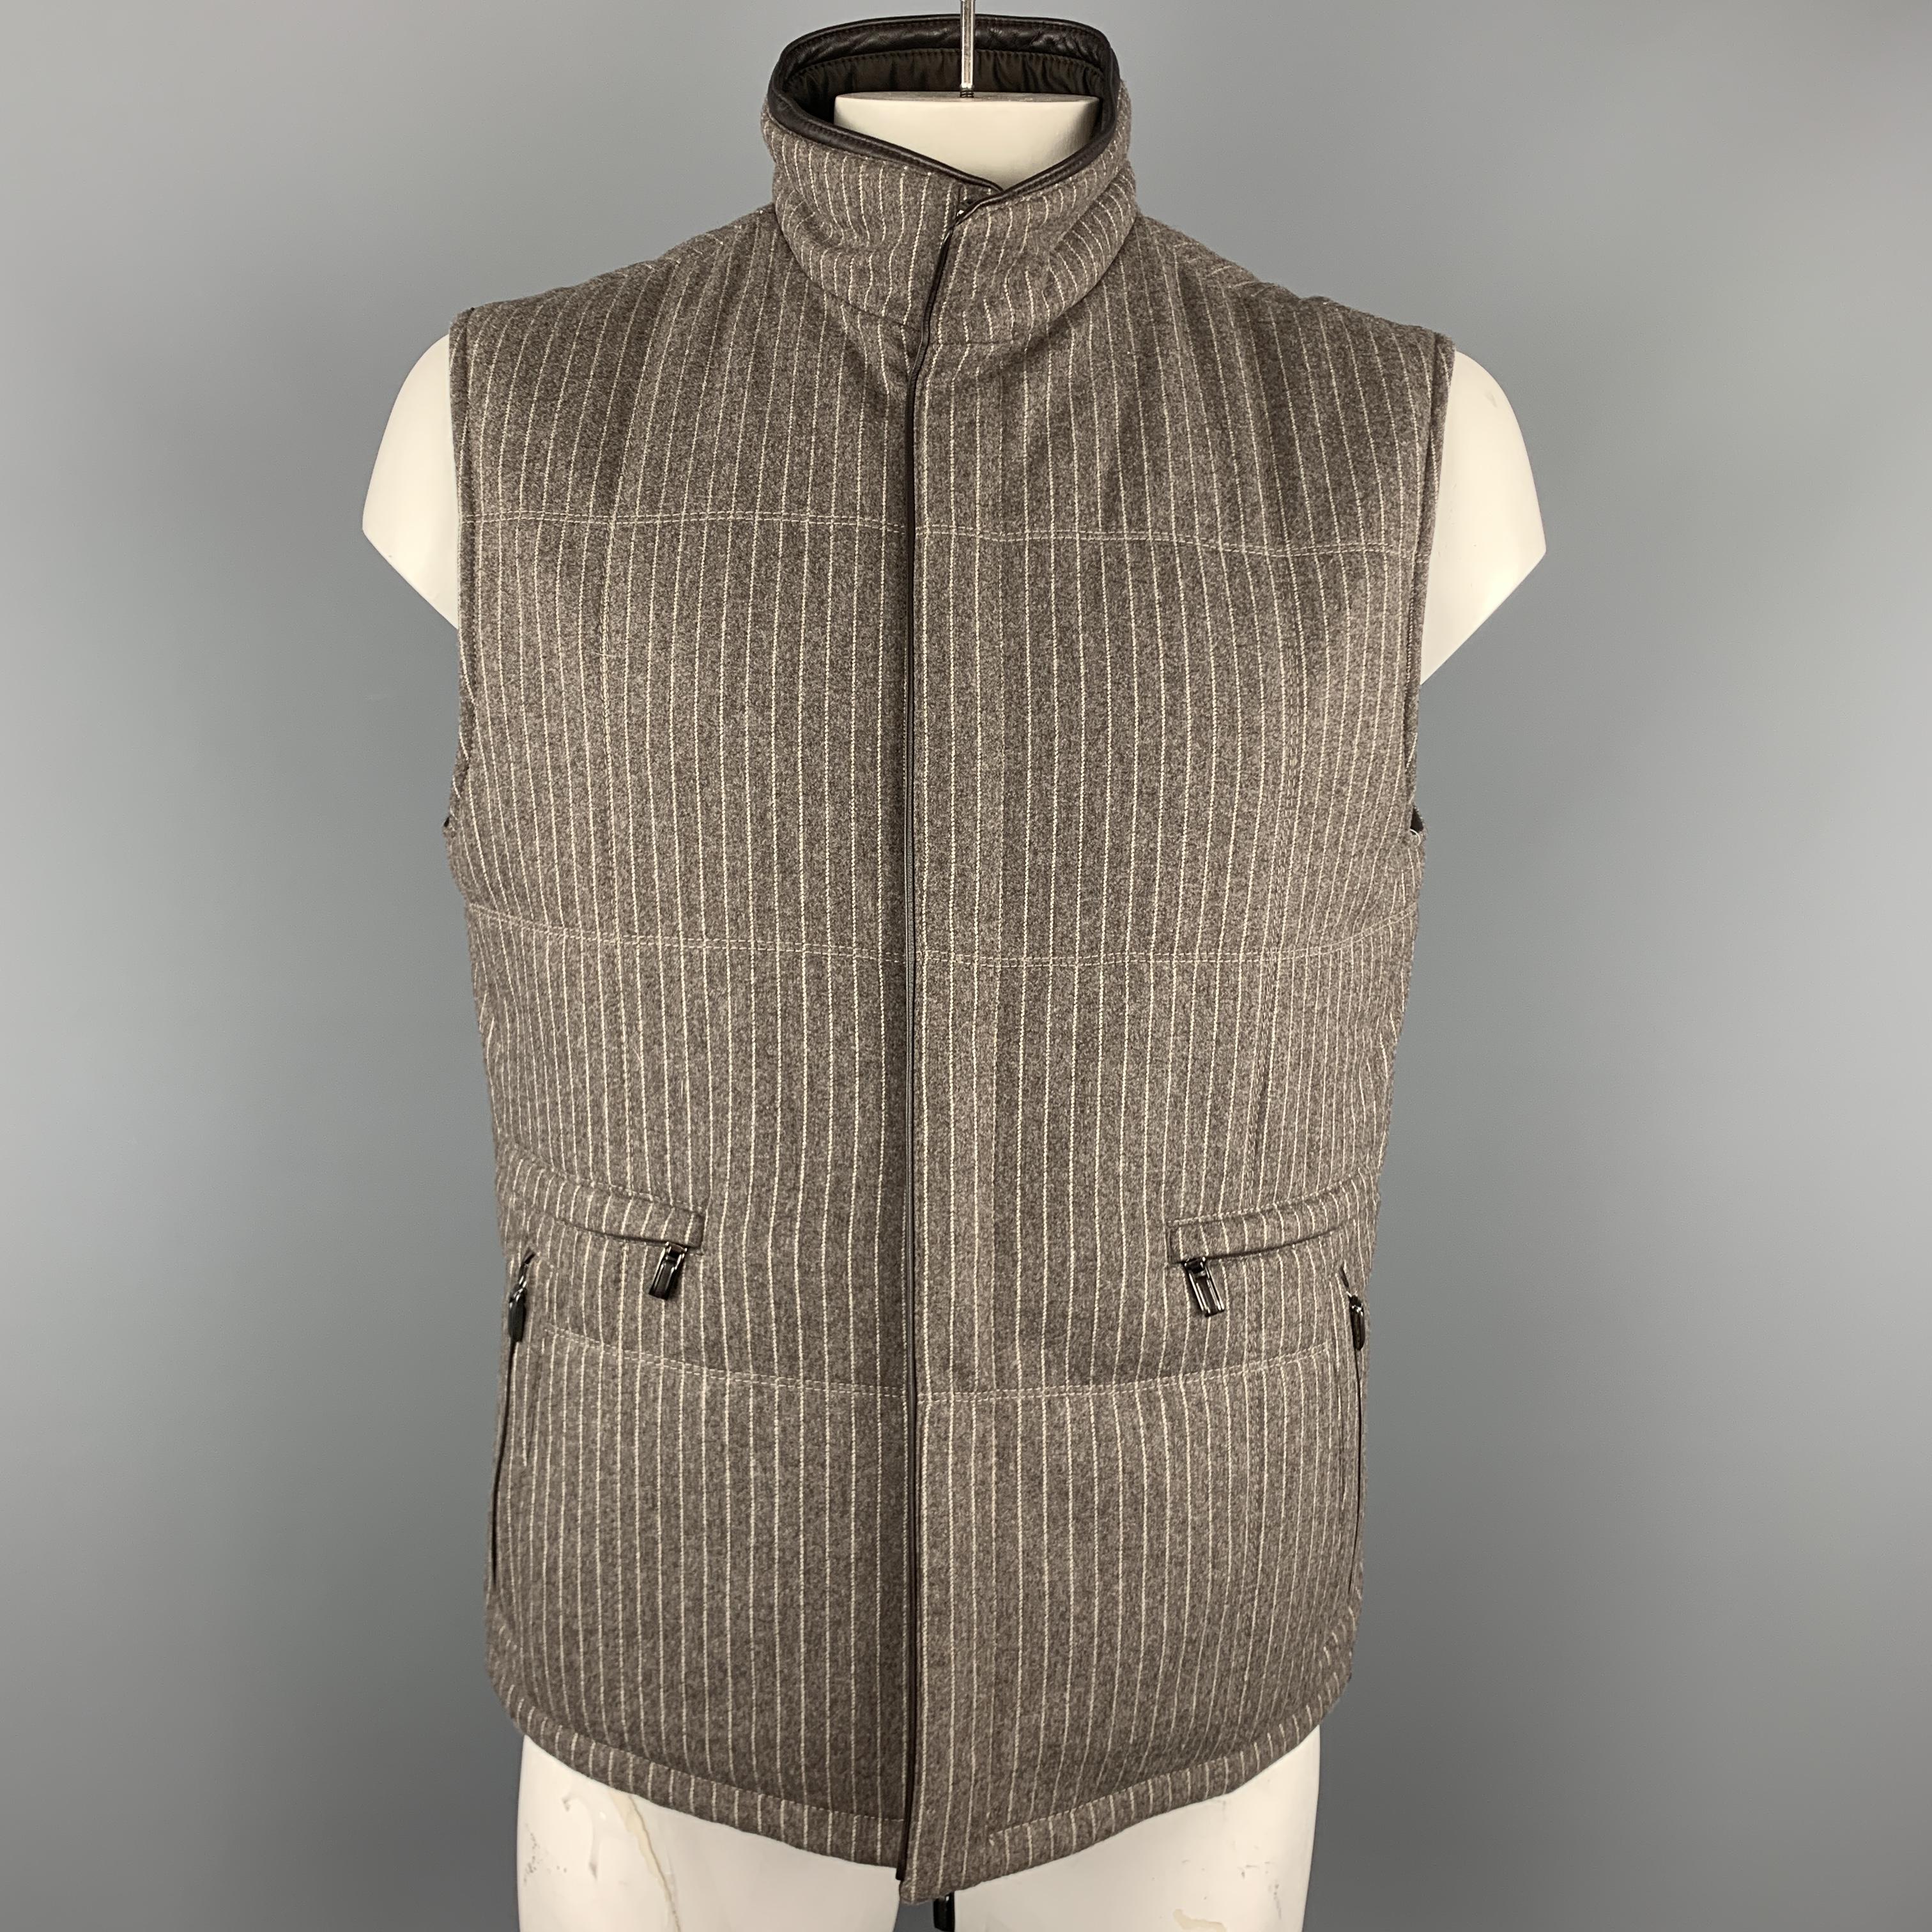 This classic ERMENEGILDO ZEGNA vest comes in a muted taupe gray & cream pinstriped wool cashmere blend felt and features a high collar, hidden double zip closure, chocolate brown leather piping, and four zip pockets. Reversible to a deep brown nylon